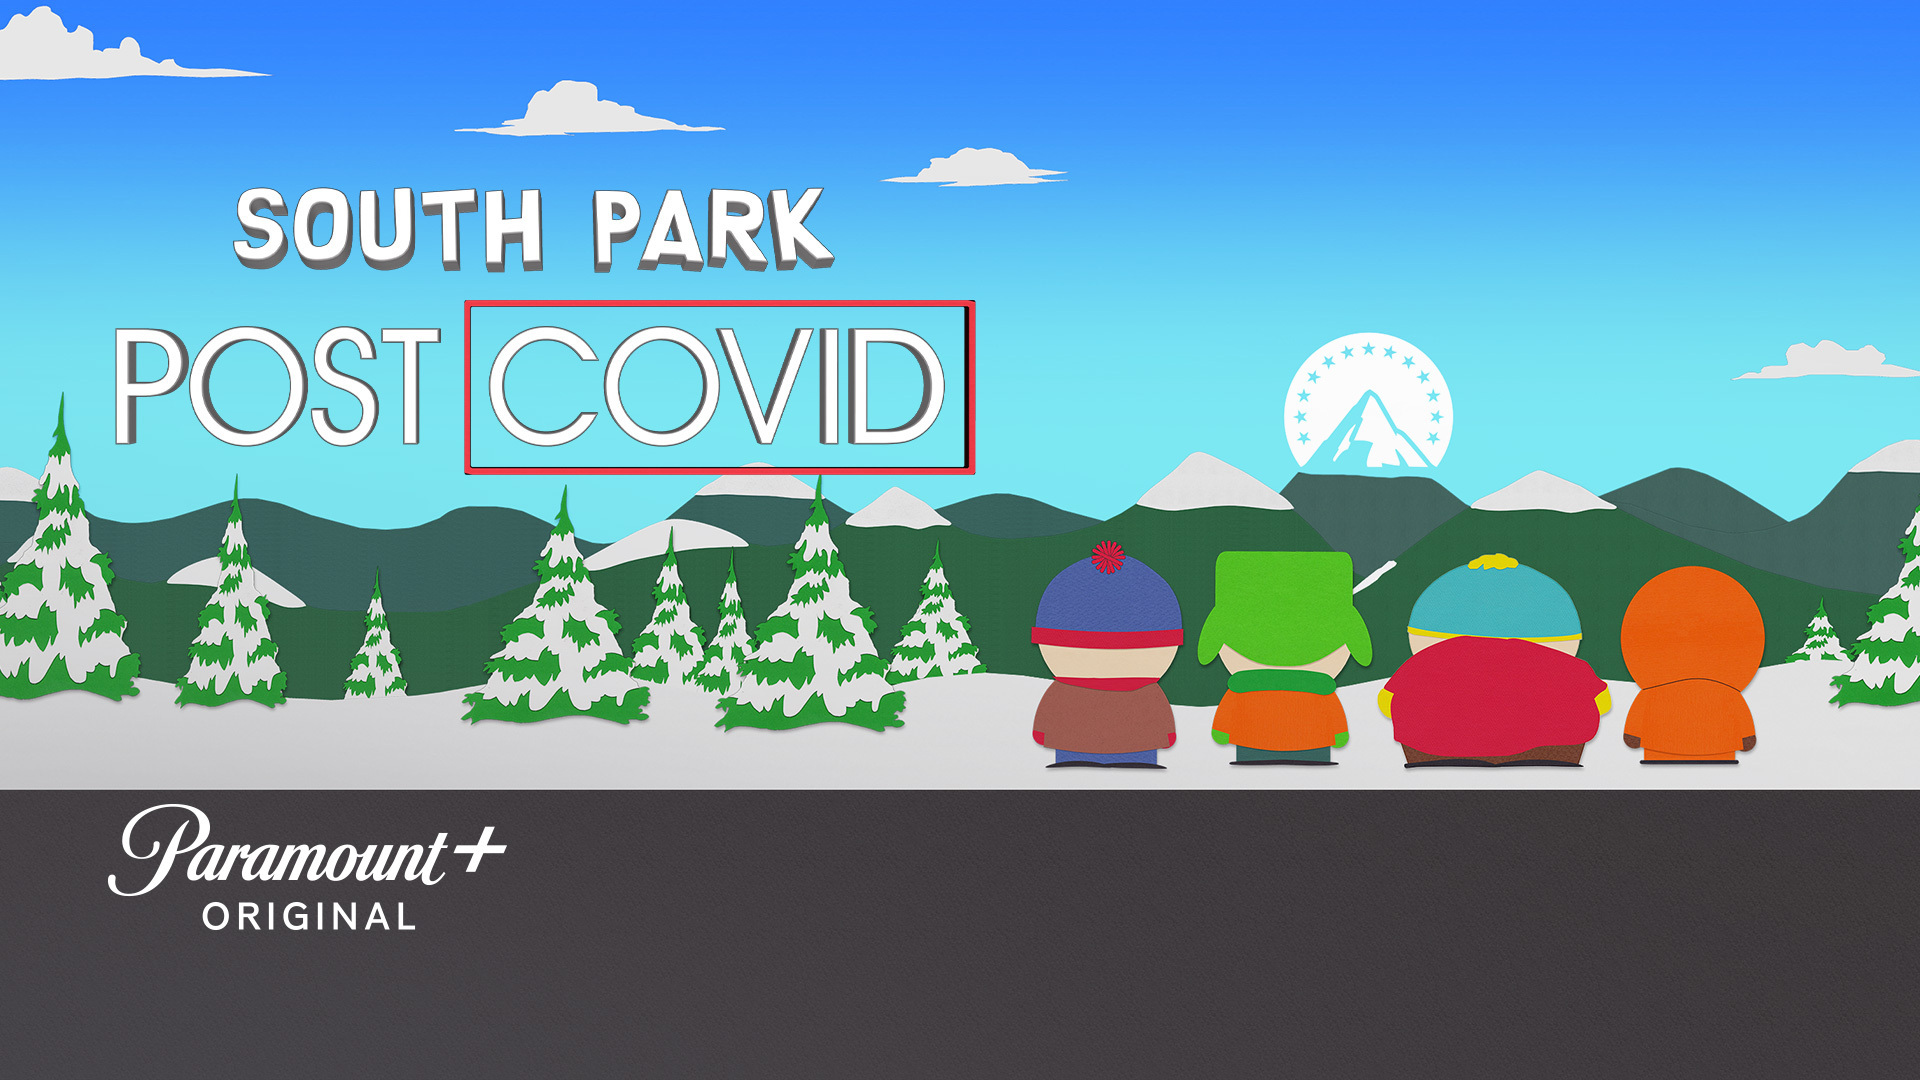 SOUTH PARK: POST COVID - Watch Full Movie on Paramount Plus